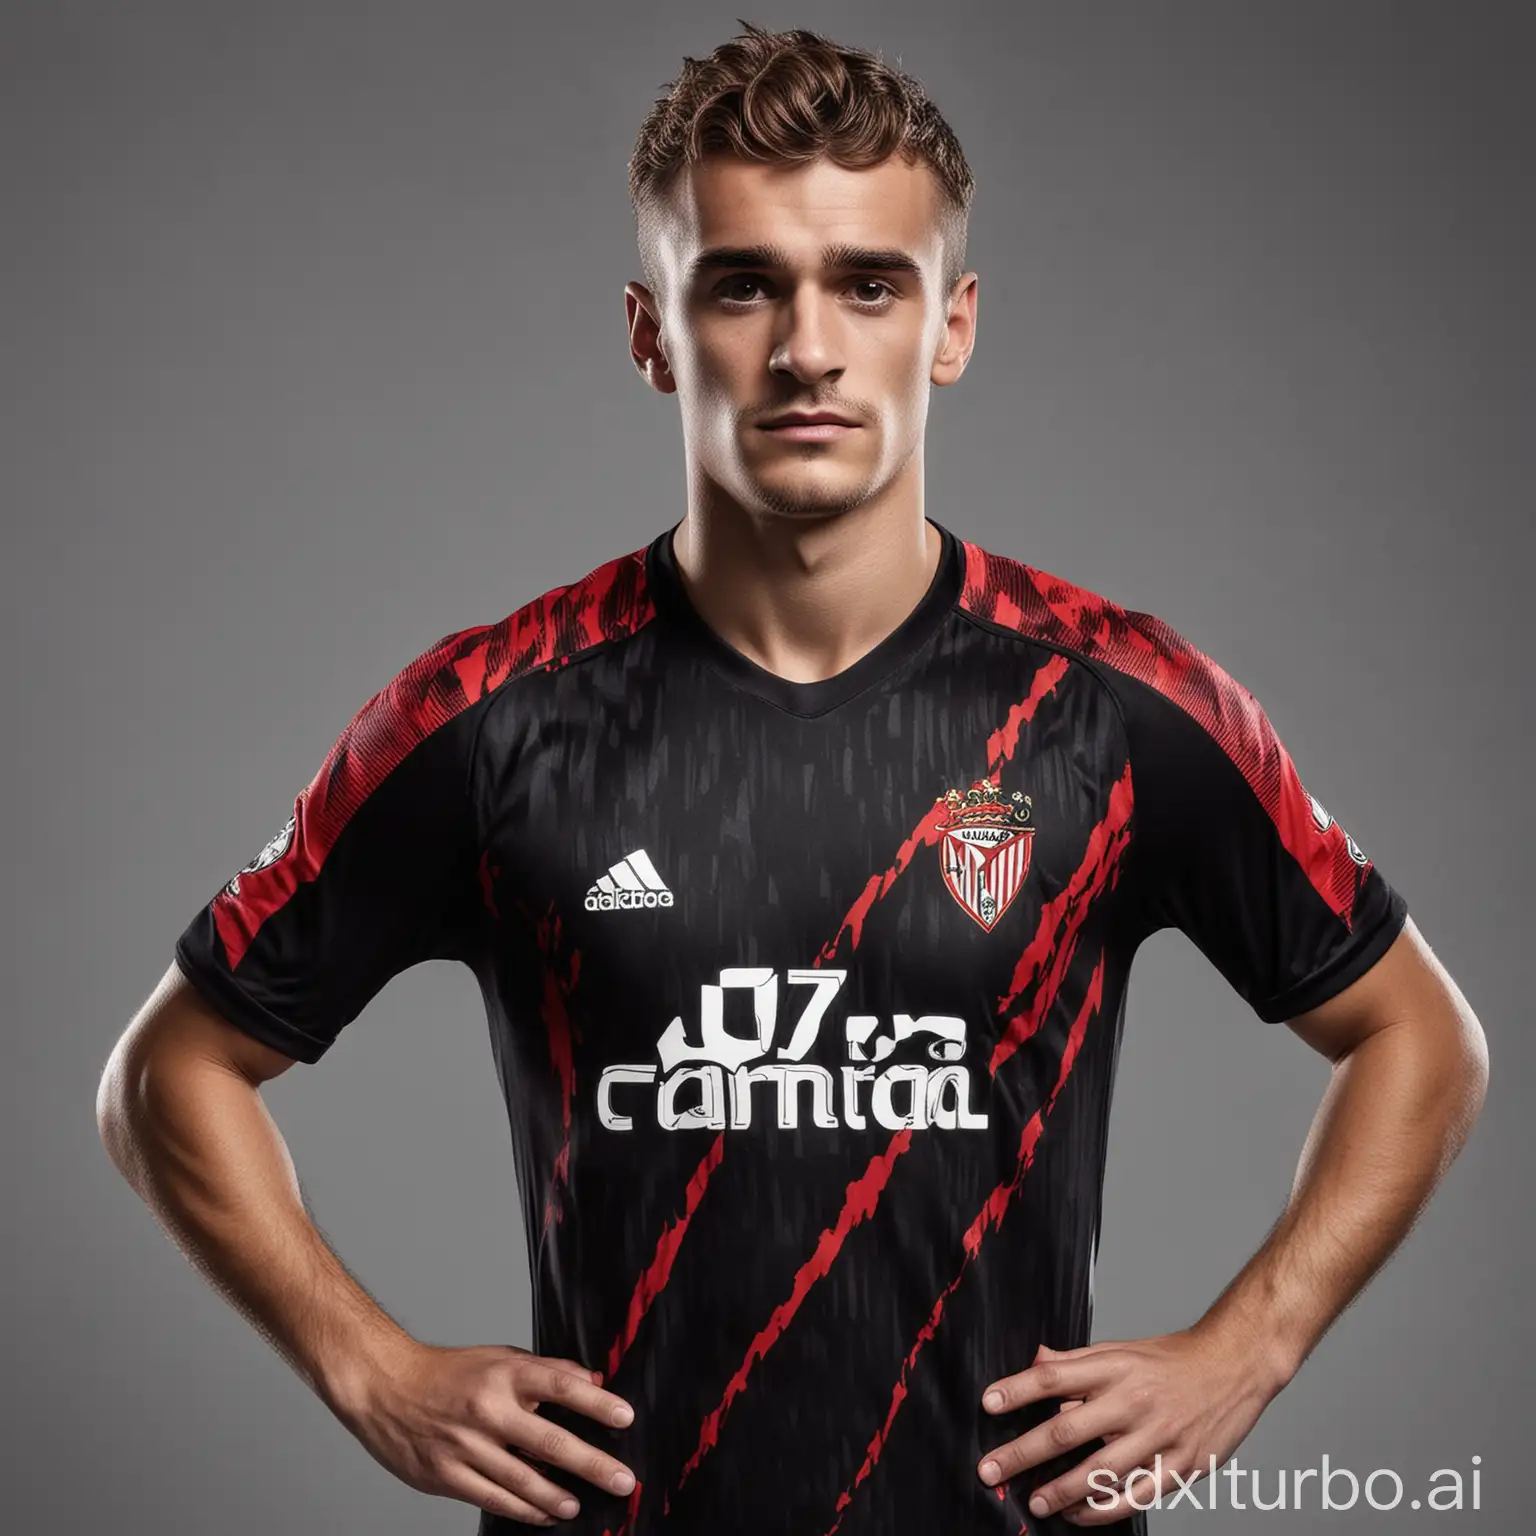 Advertisement for a new soccer jersey, black jersey with red accents. Antoine Griezmann as model